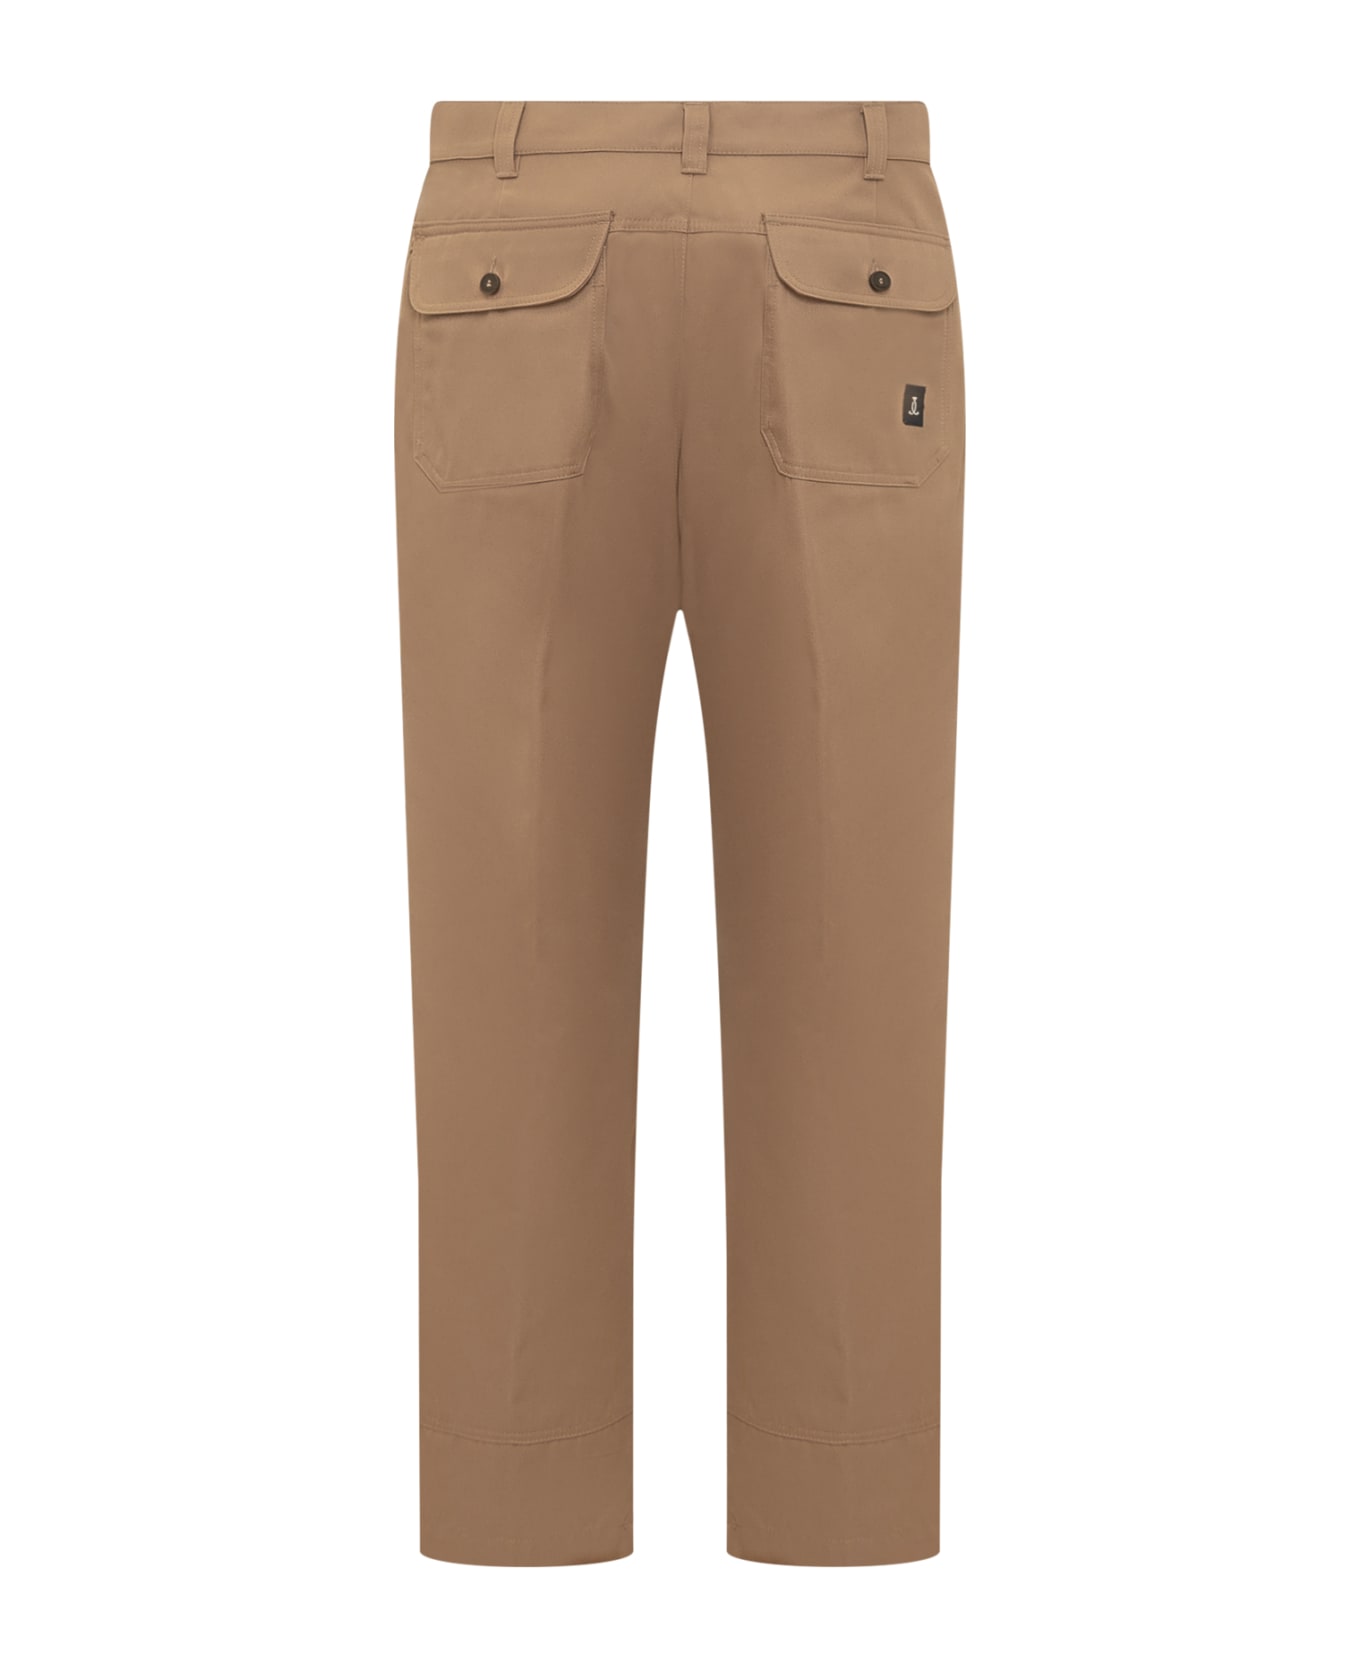 The Seafarer Prospect Trousers - 8030 ボトムス